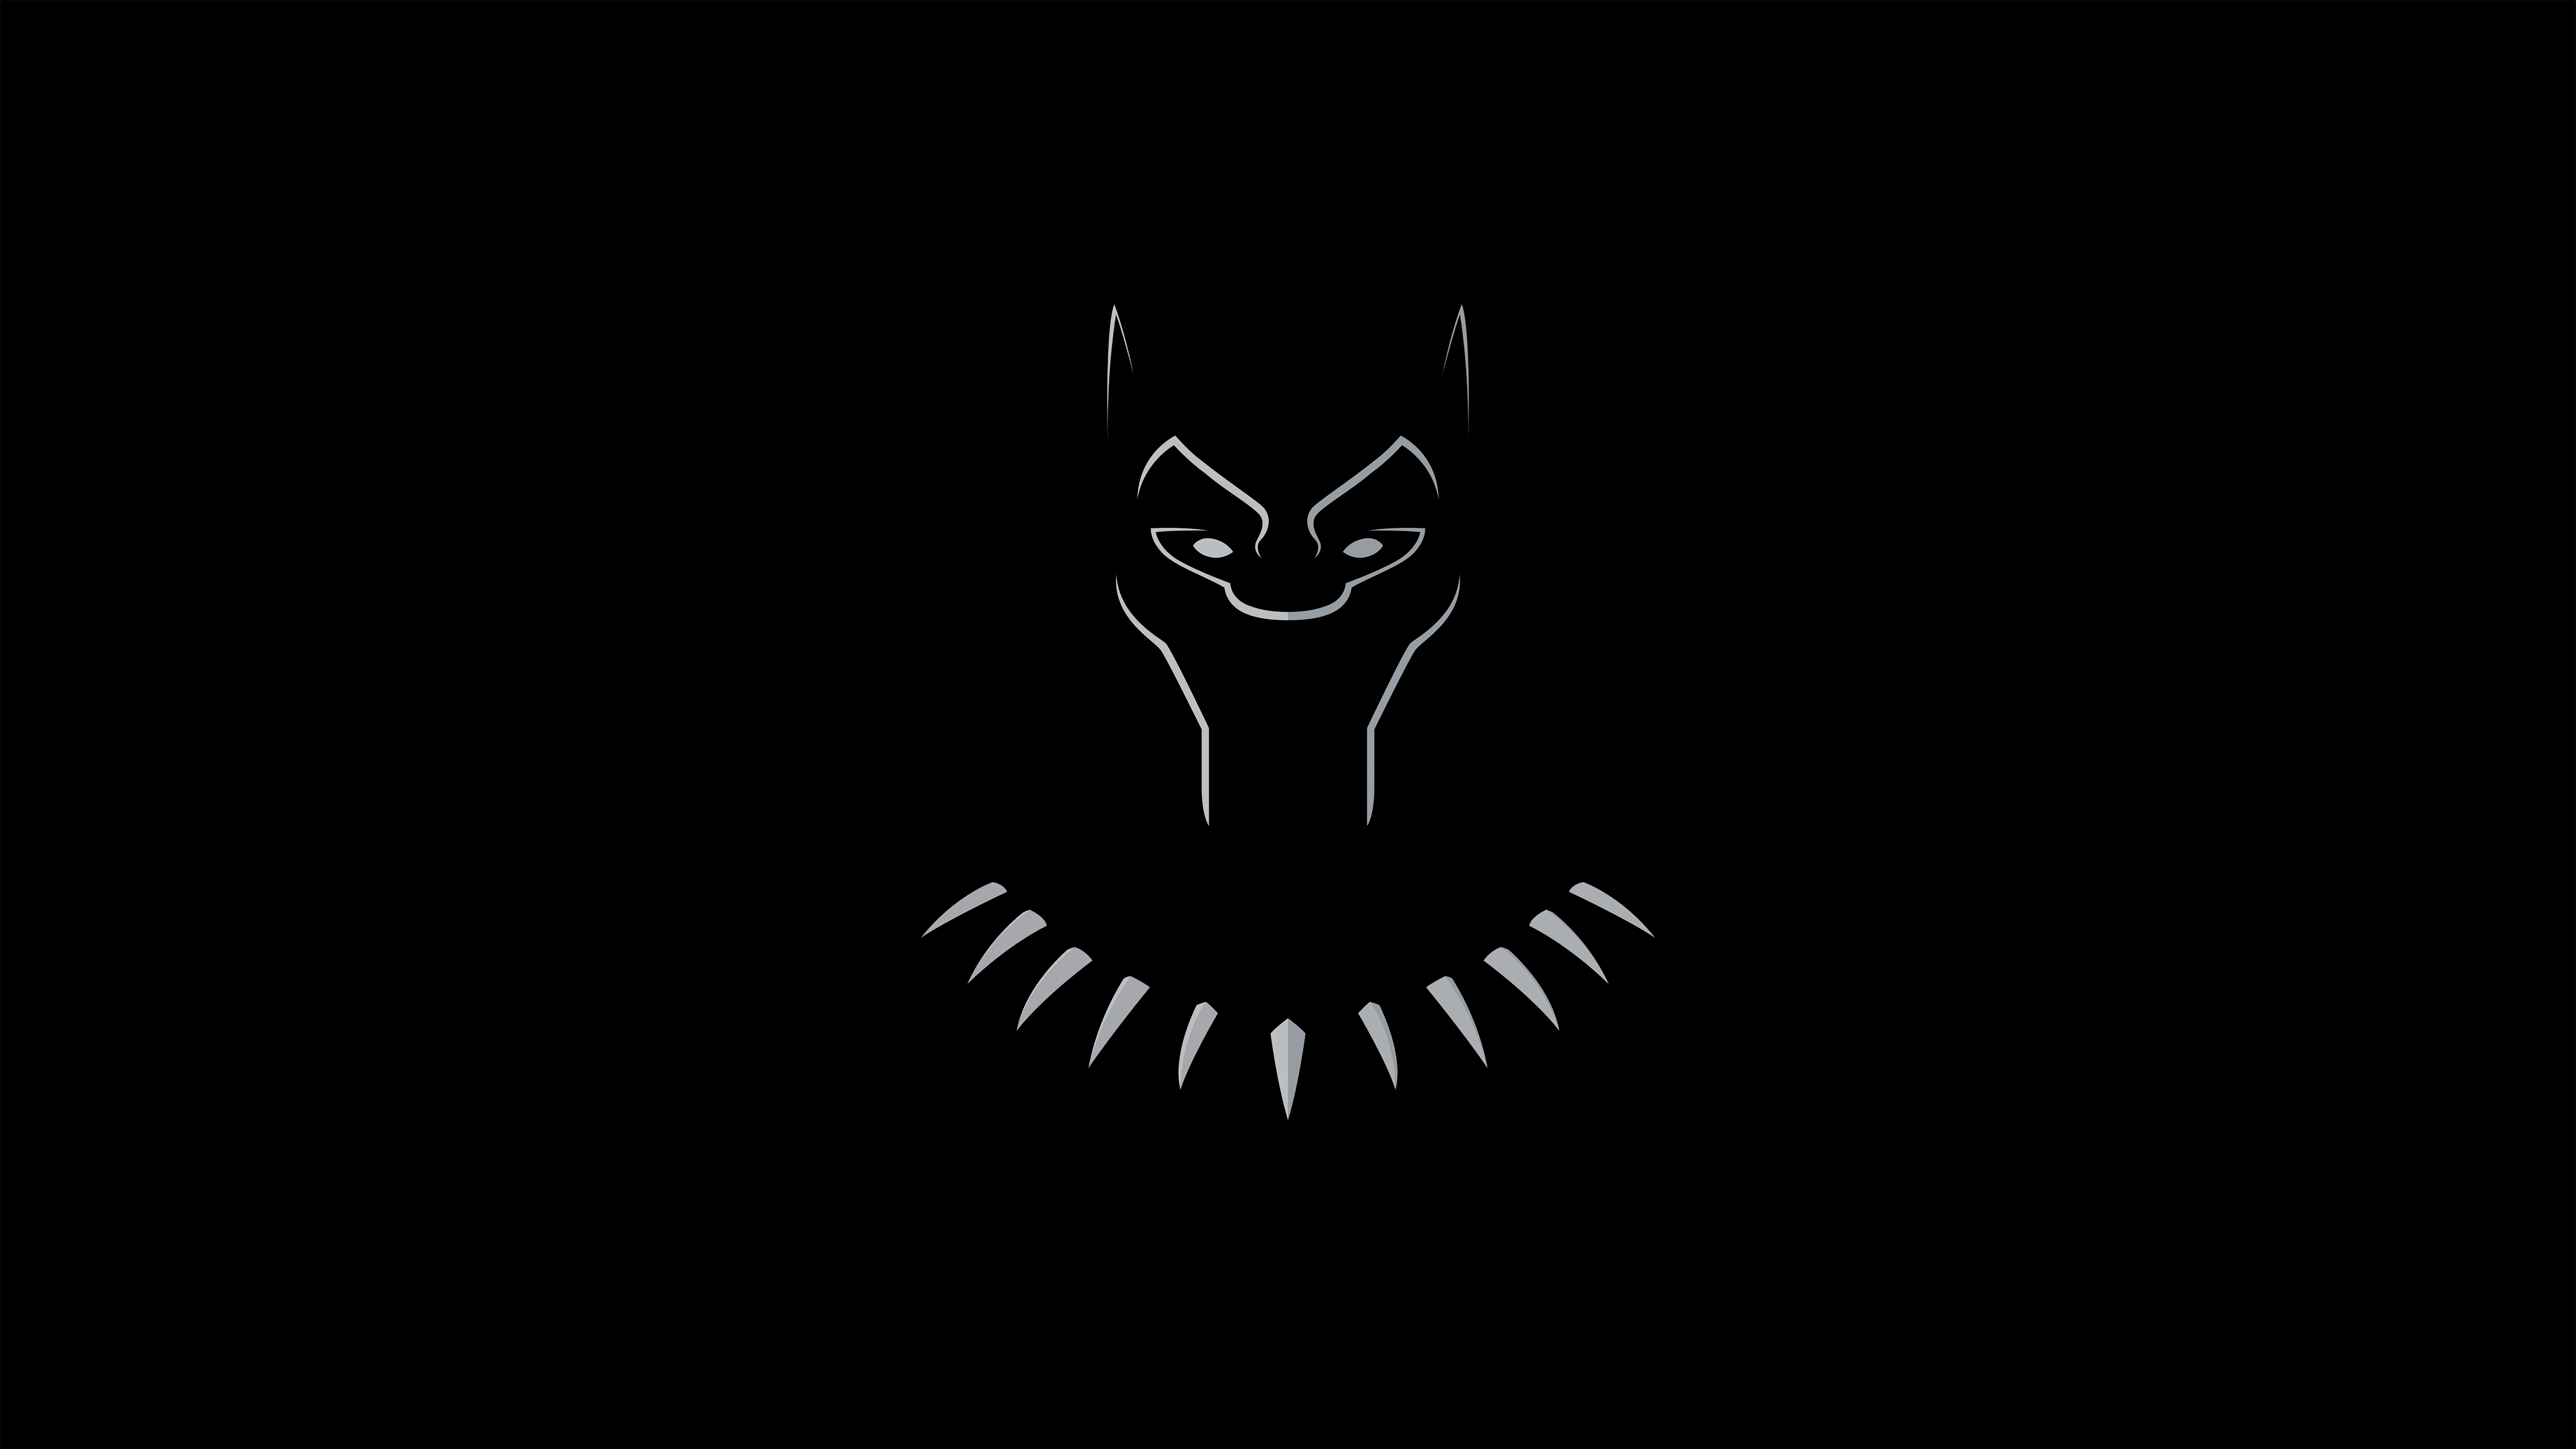 480x800 Black Panther Dark Minimal 5k Galaxy Note,HTC Desire,Nokia Lumia  520,625 Android HD 4k Wallpapers, Images, Backgrounds, Photos and Pictures